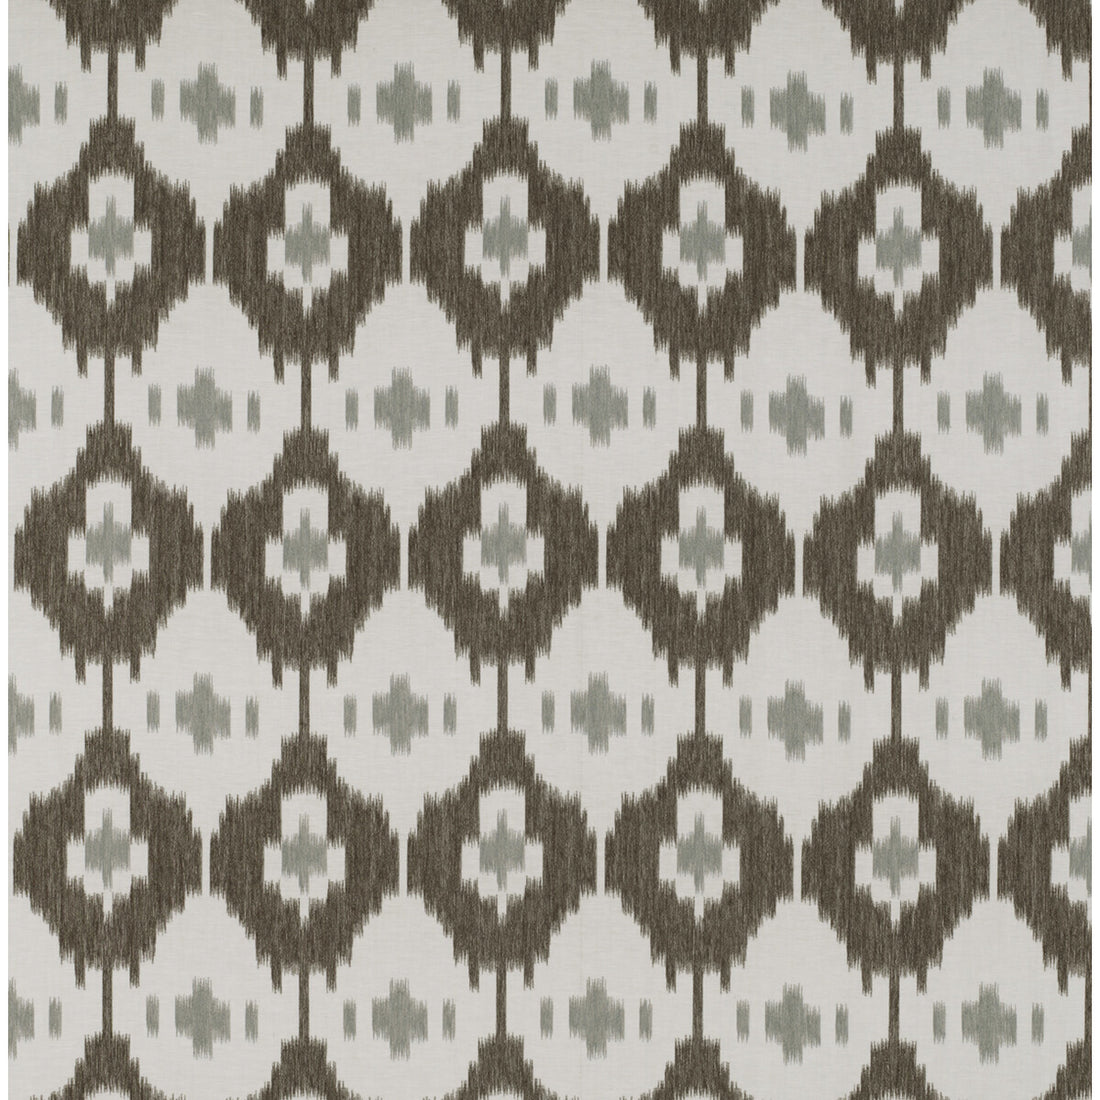 Panarea fabric in chocolate/gris color - pattern GDT5315.007.0 - by Gaston y Daniela in the Tierras collection